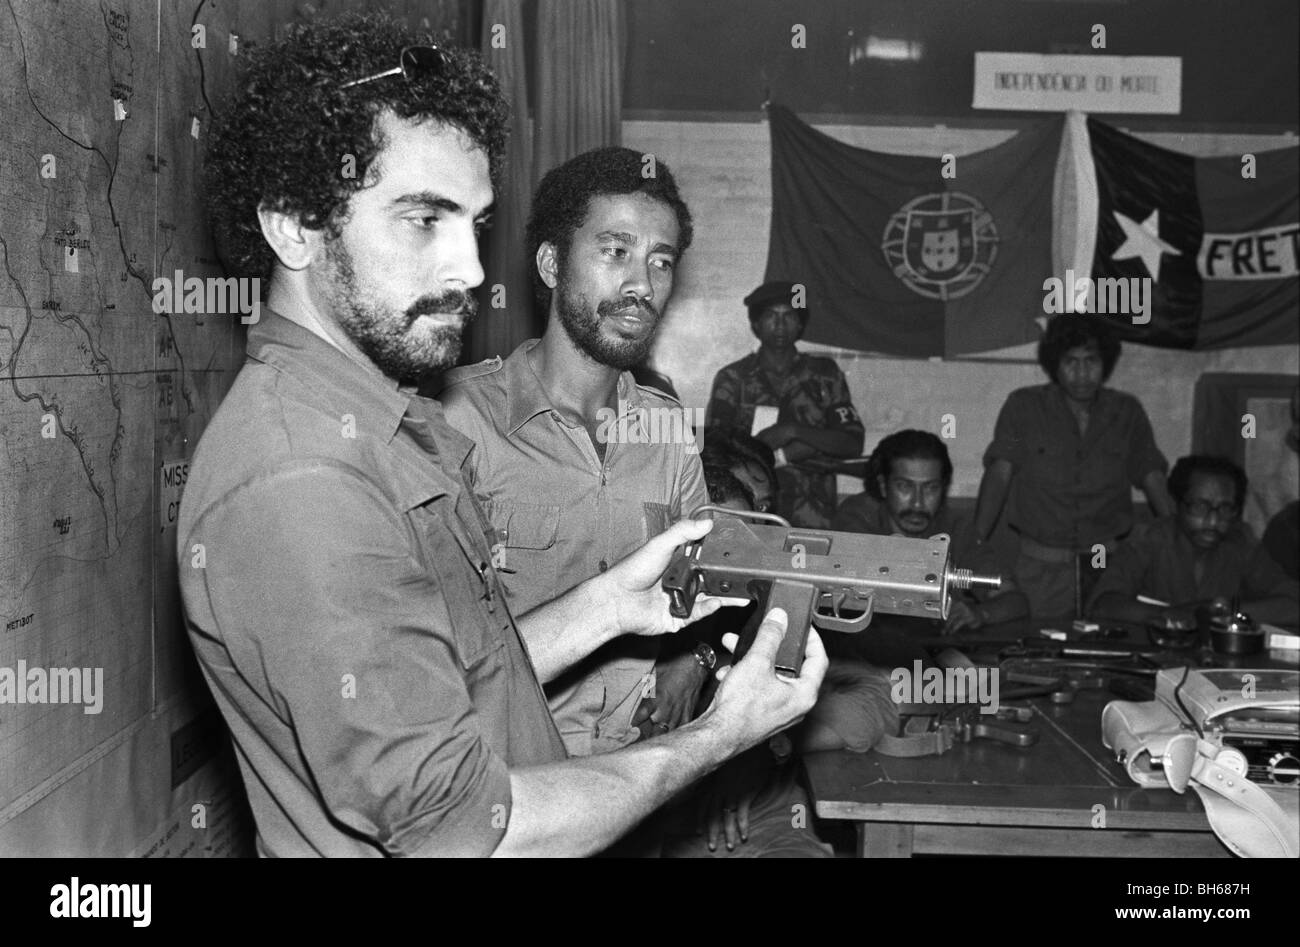 Jose Ramos-Horta shows a compact gun to President Xavier Amaral (right) and Fretilin in their HQ Dili East Timor Stock Photo